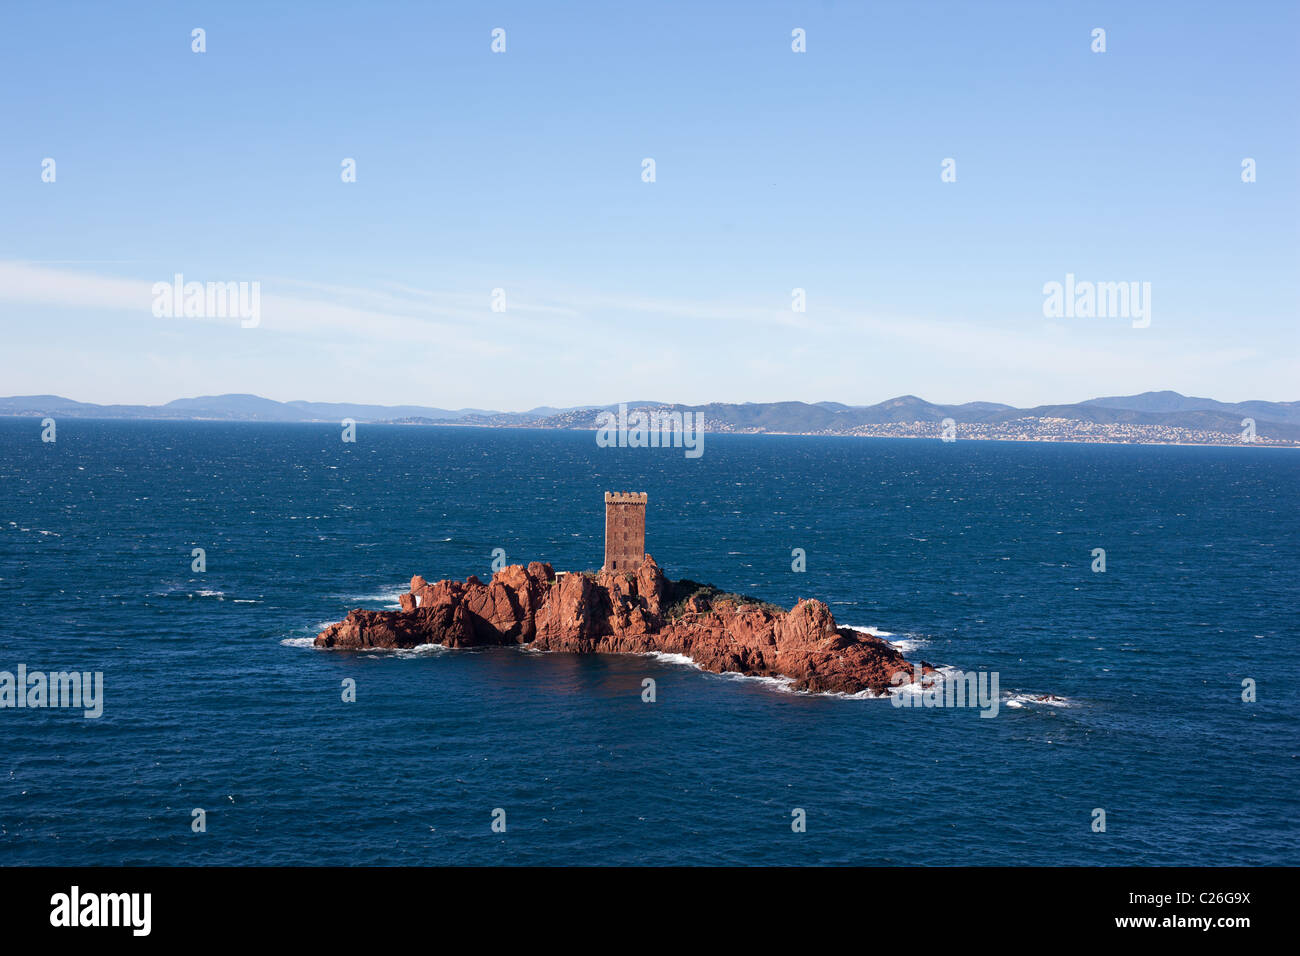 Small island of stunning red volcanic rock, crowned with a square tower of the same color. L'Île d'Or, Esterel Massif, Saint-Raphaël, Var, France. Stock Photo